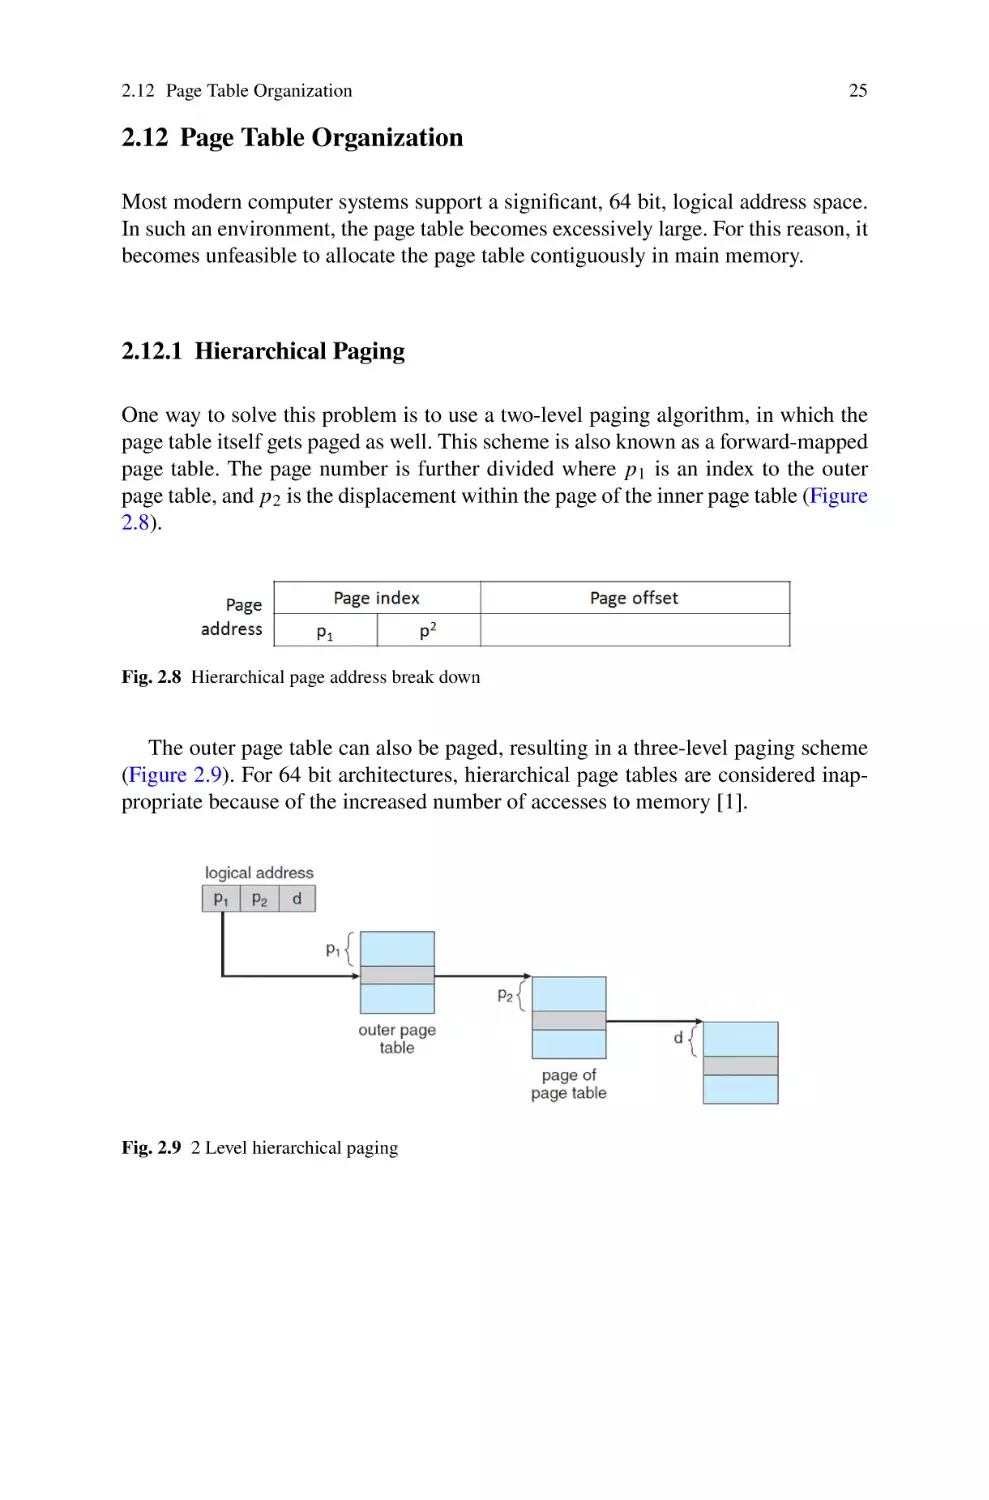 2.12 Page Table Organization
2.12.1 Hierarchical Paging